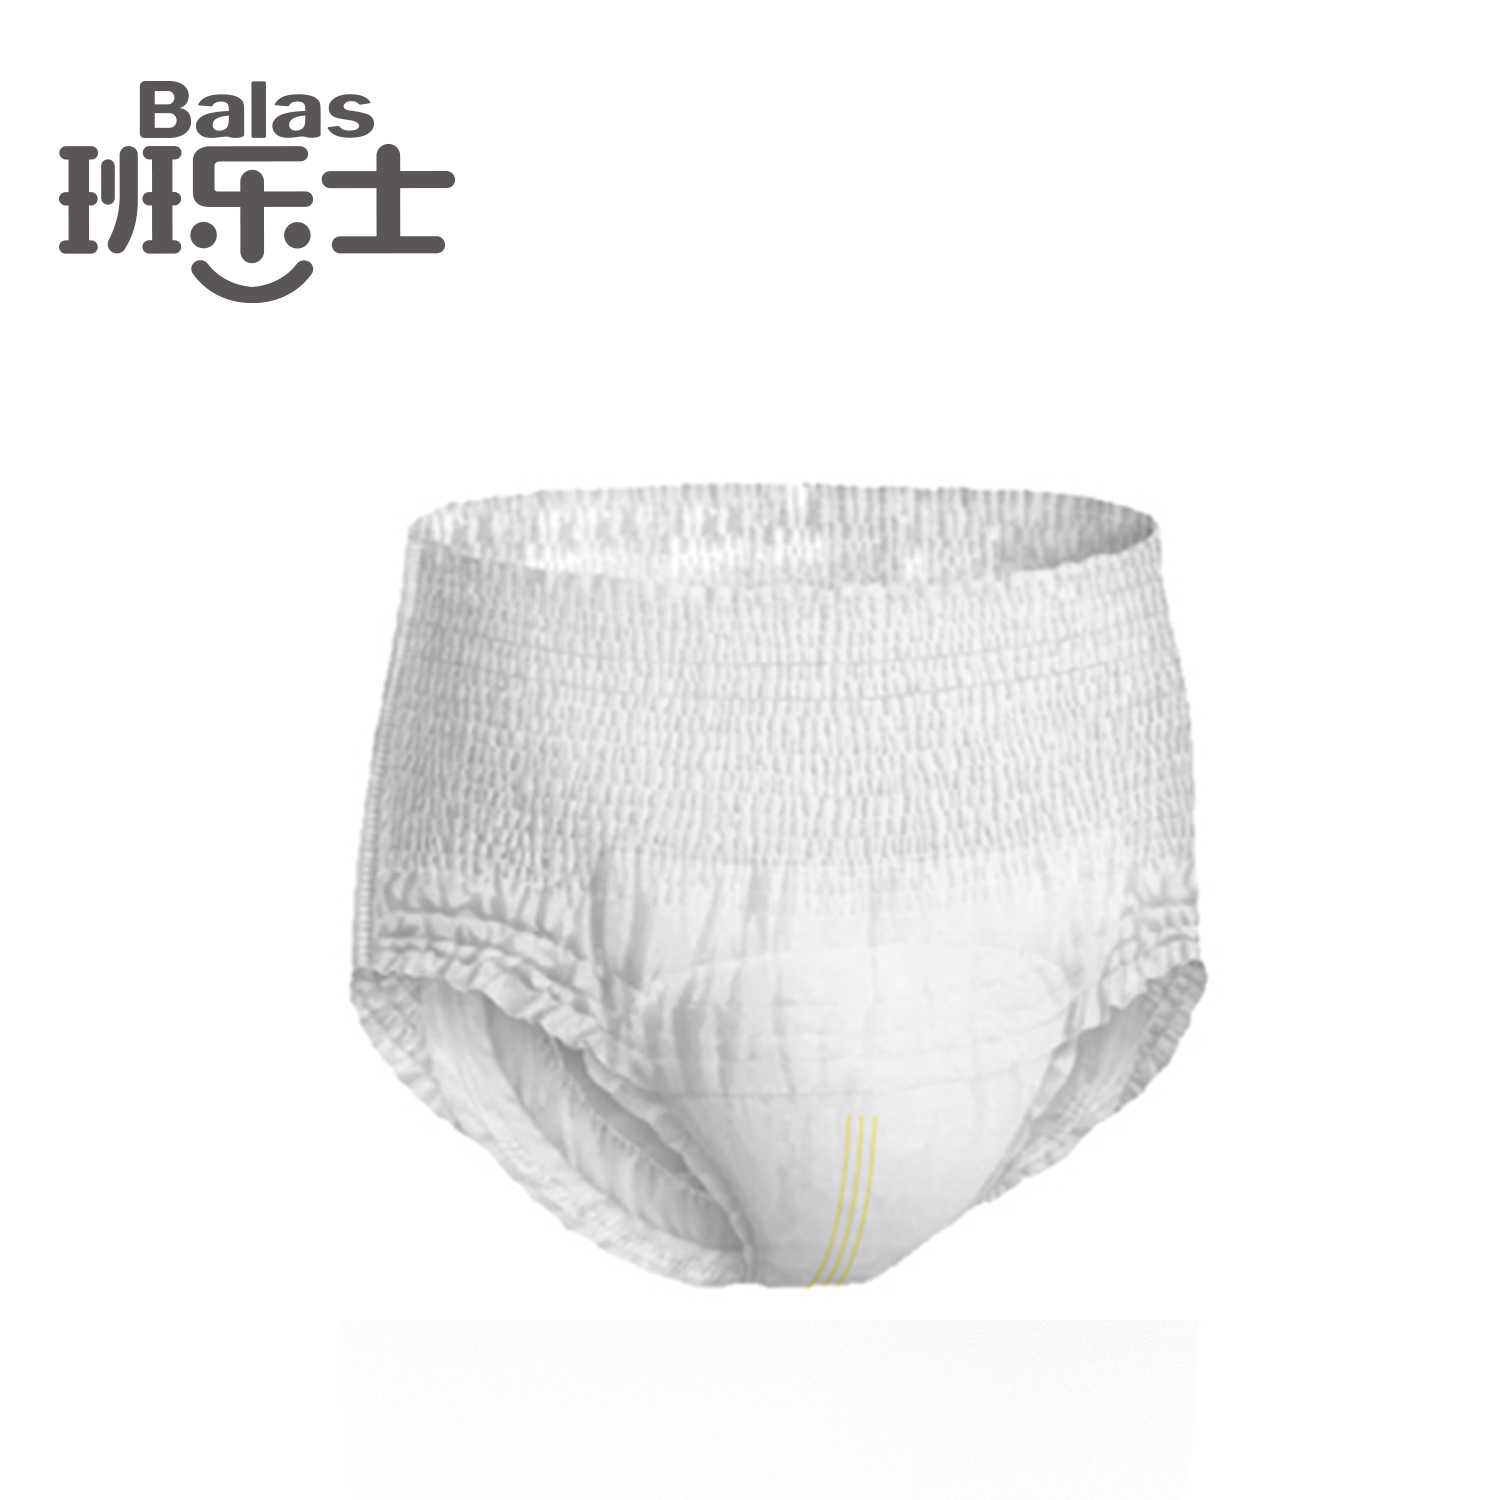 OEM Chiaus balas adult underwear diapers pull up pants overnight use  factory and suppliers